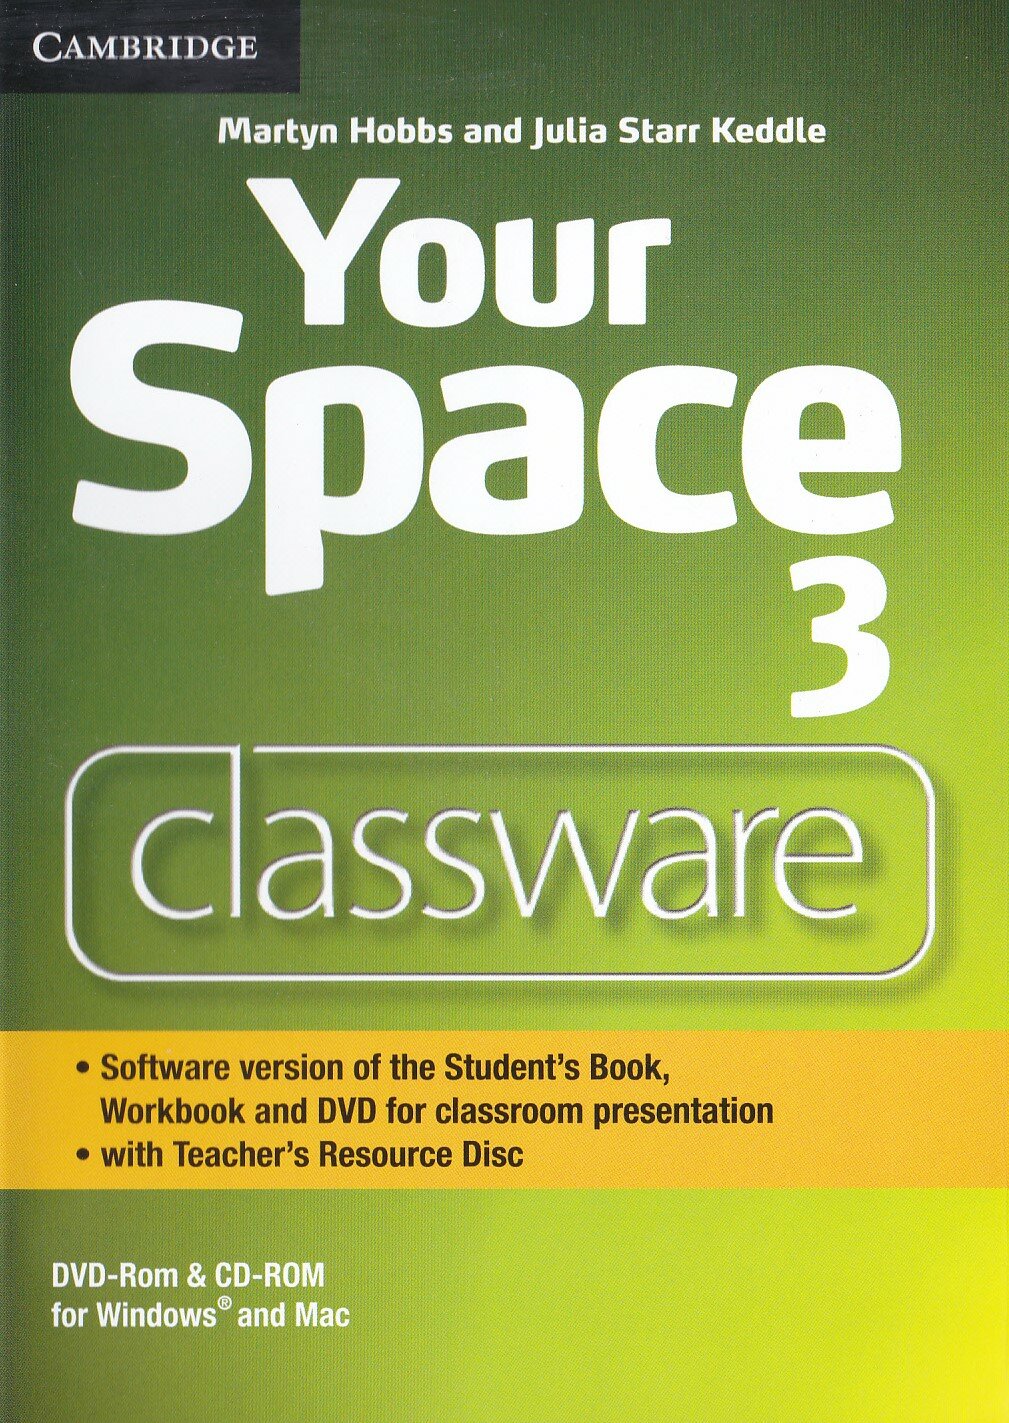 Your Space 3 Classware DVD-ROM with Teacher's Resource Disc